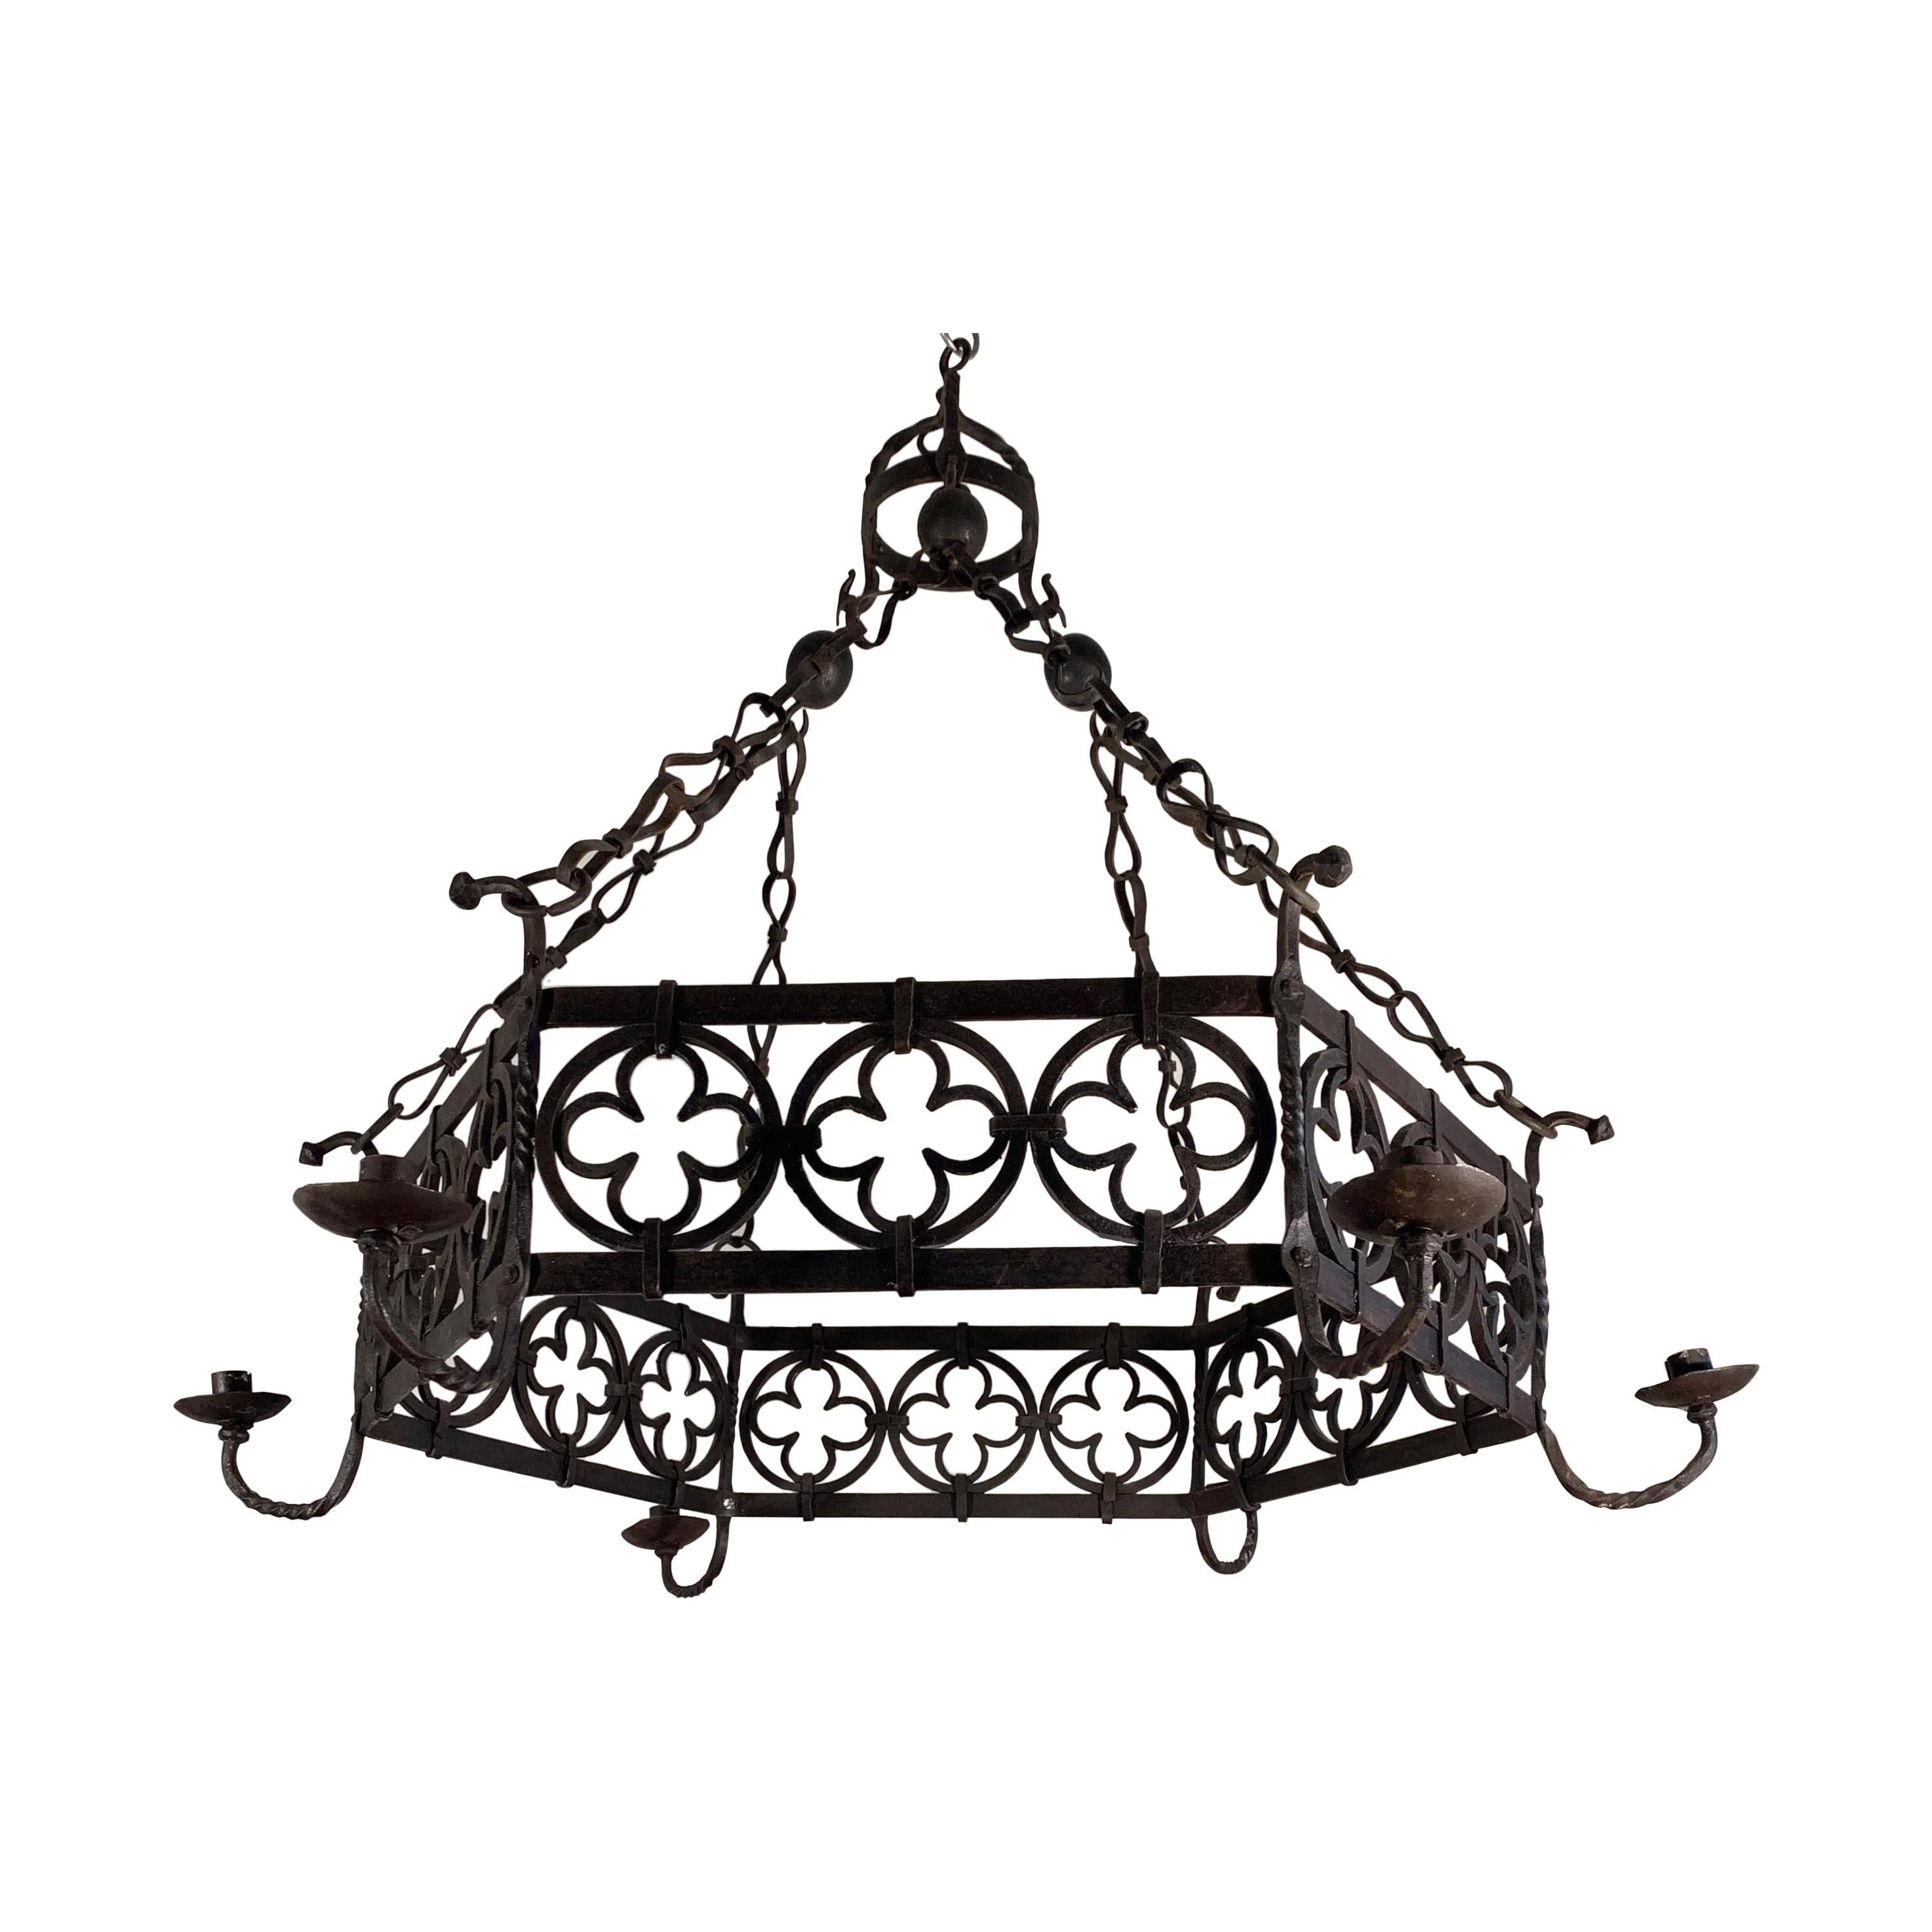 Large Gothic Revival Wrought Iron Chandelier for Dining Room / Restaurant Etc For Sale